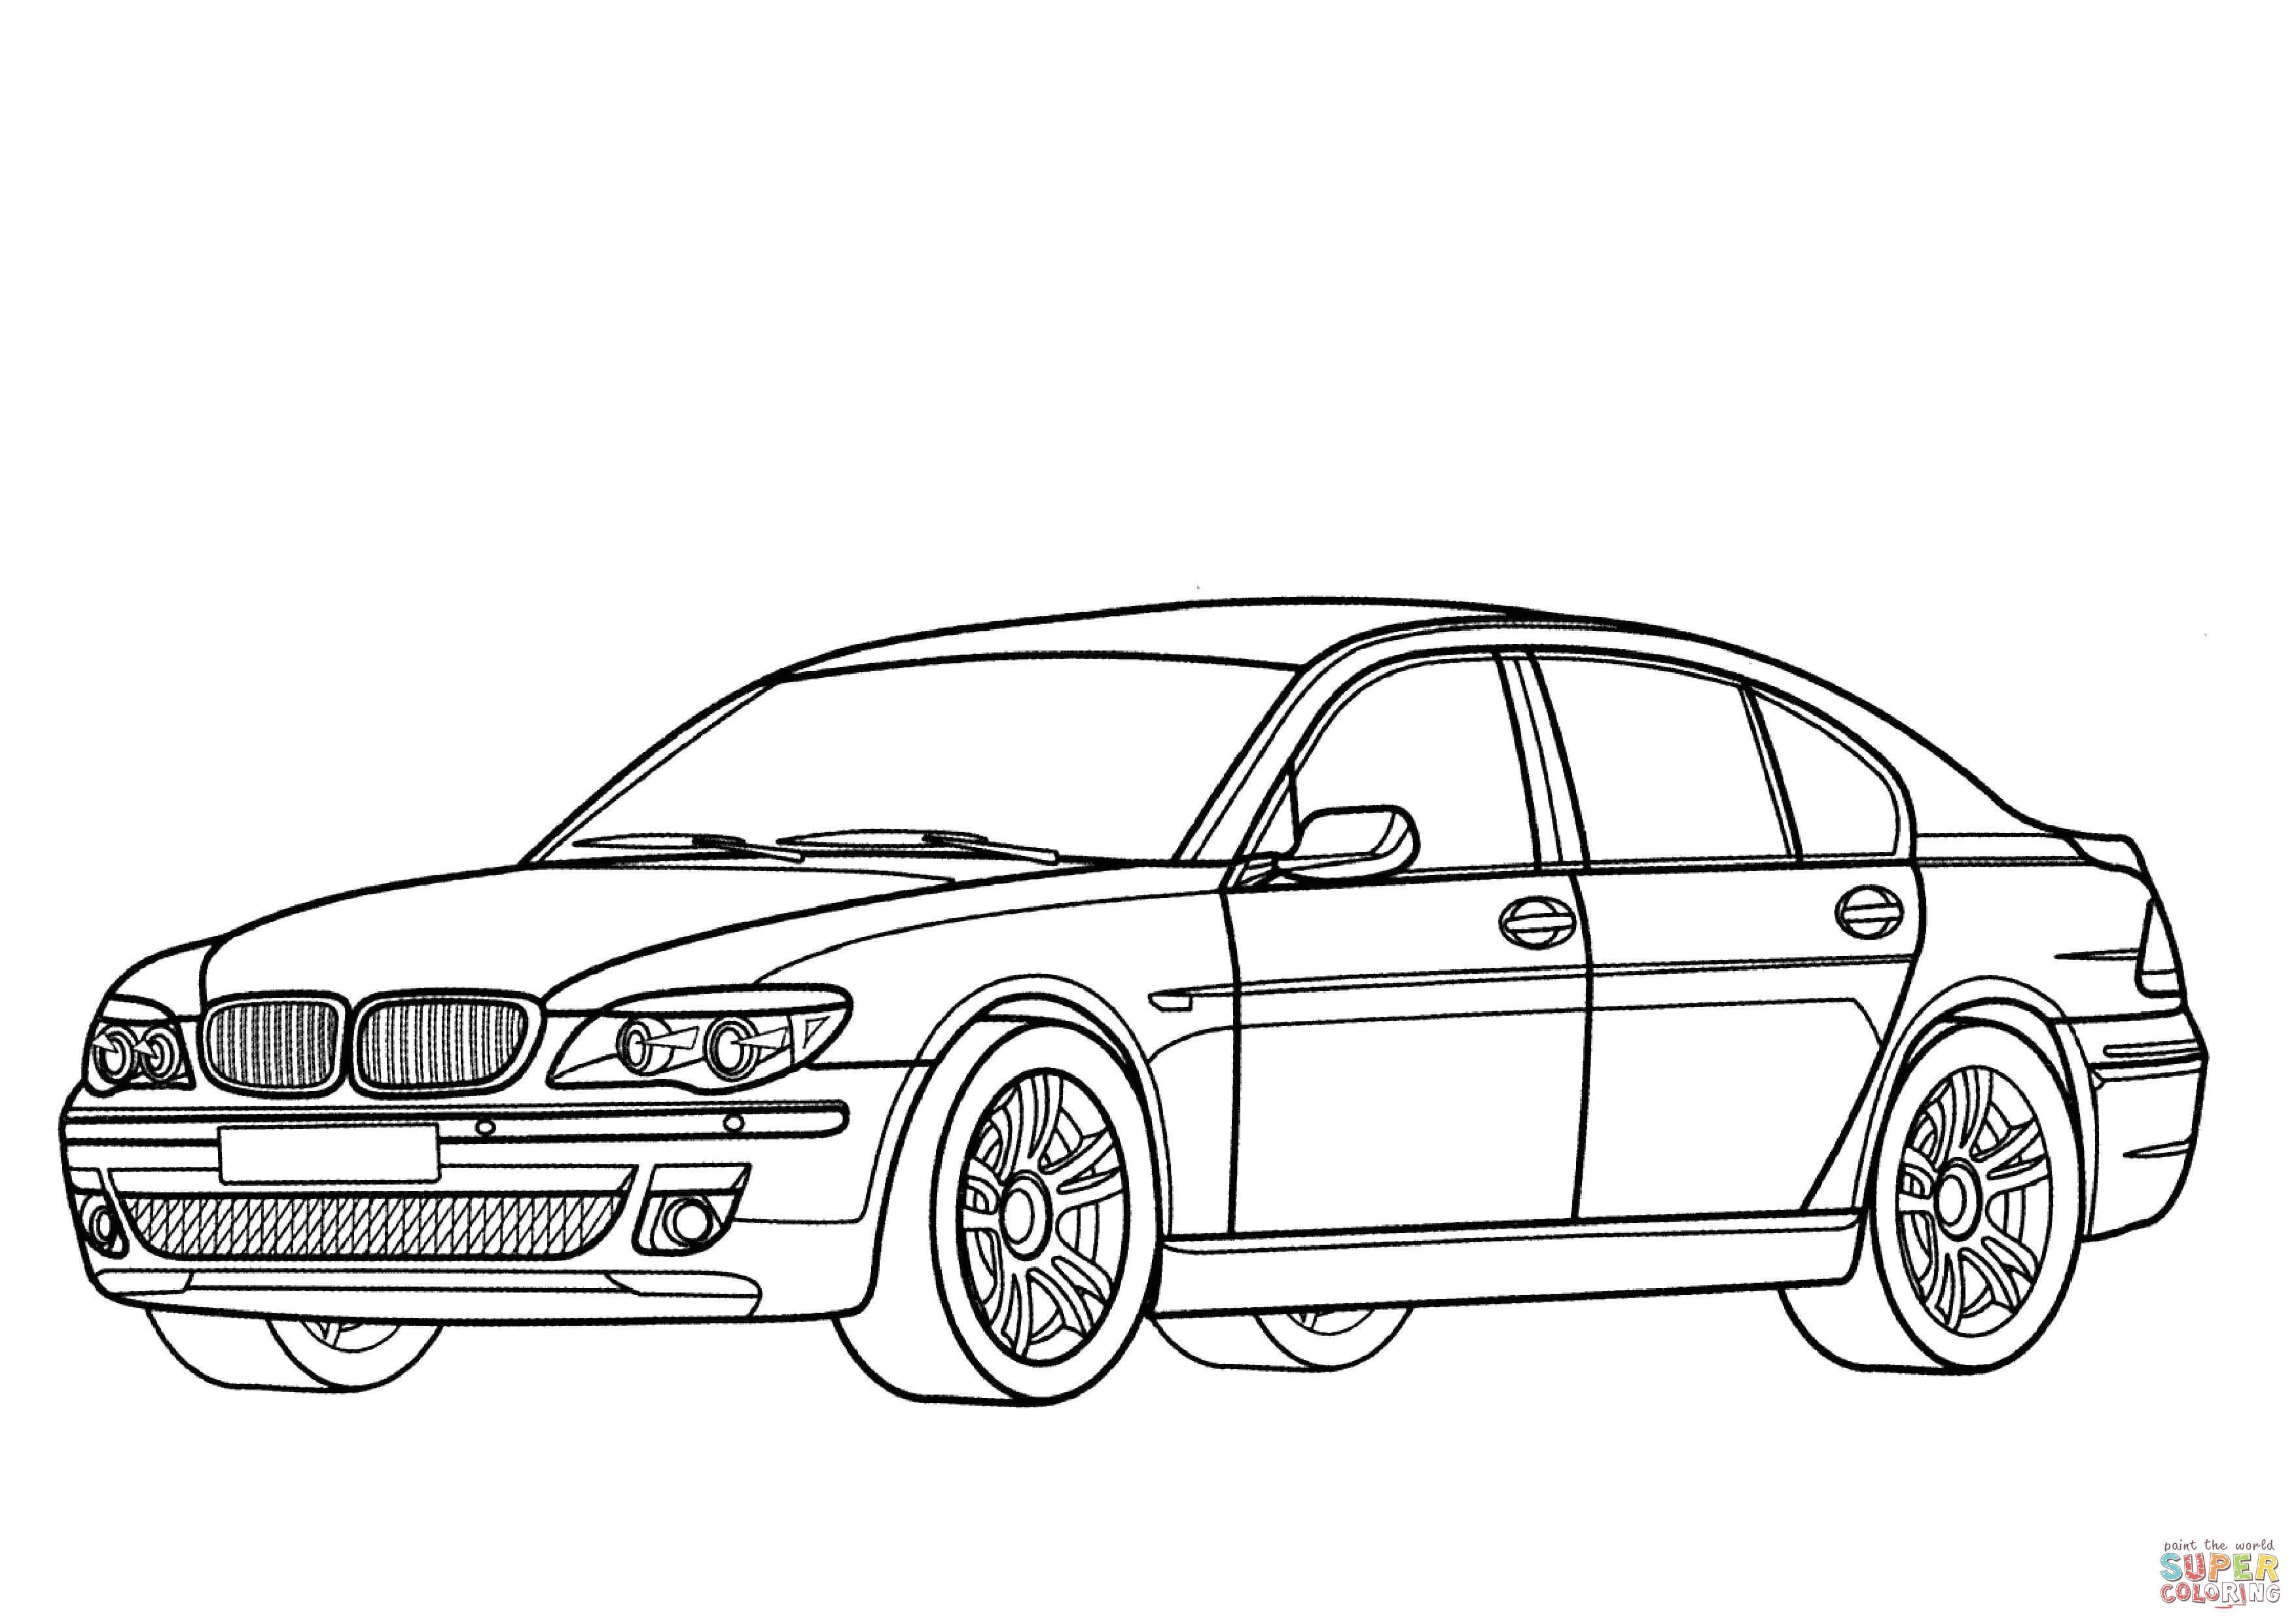 the BMW 7 Series